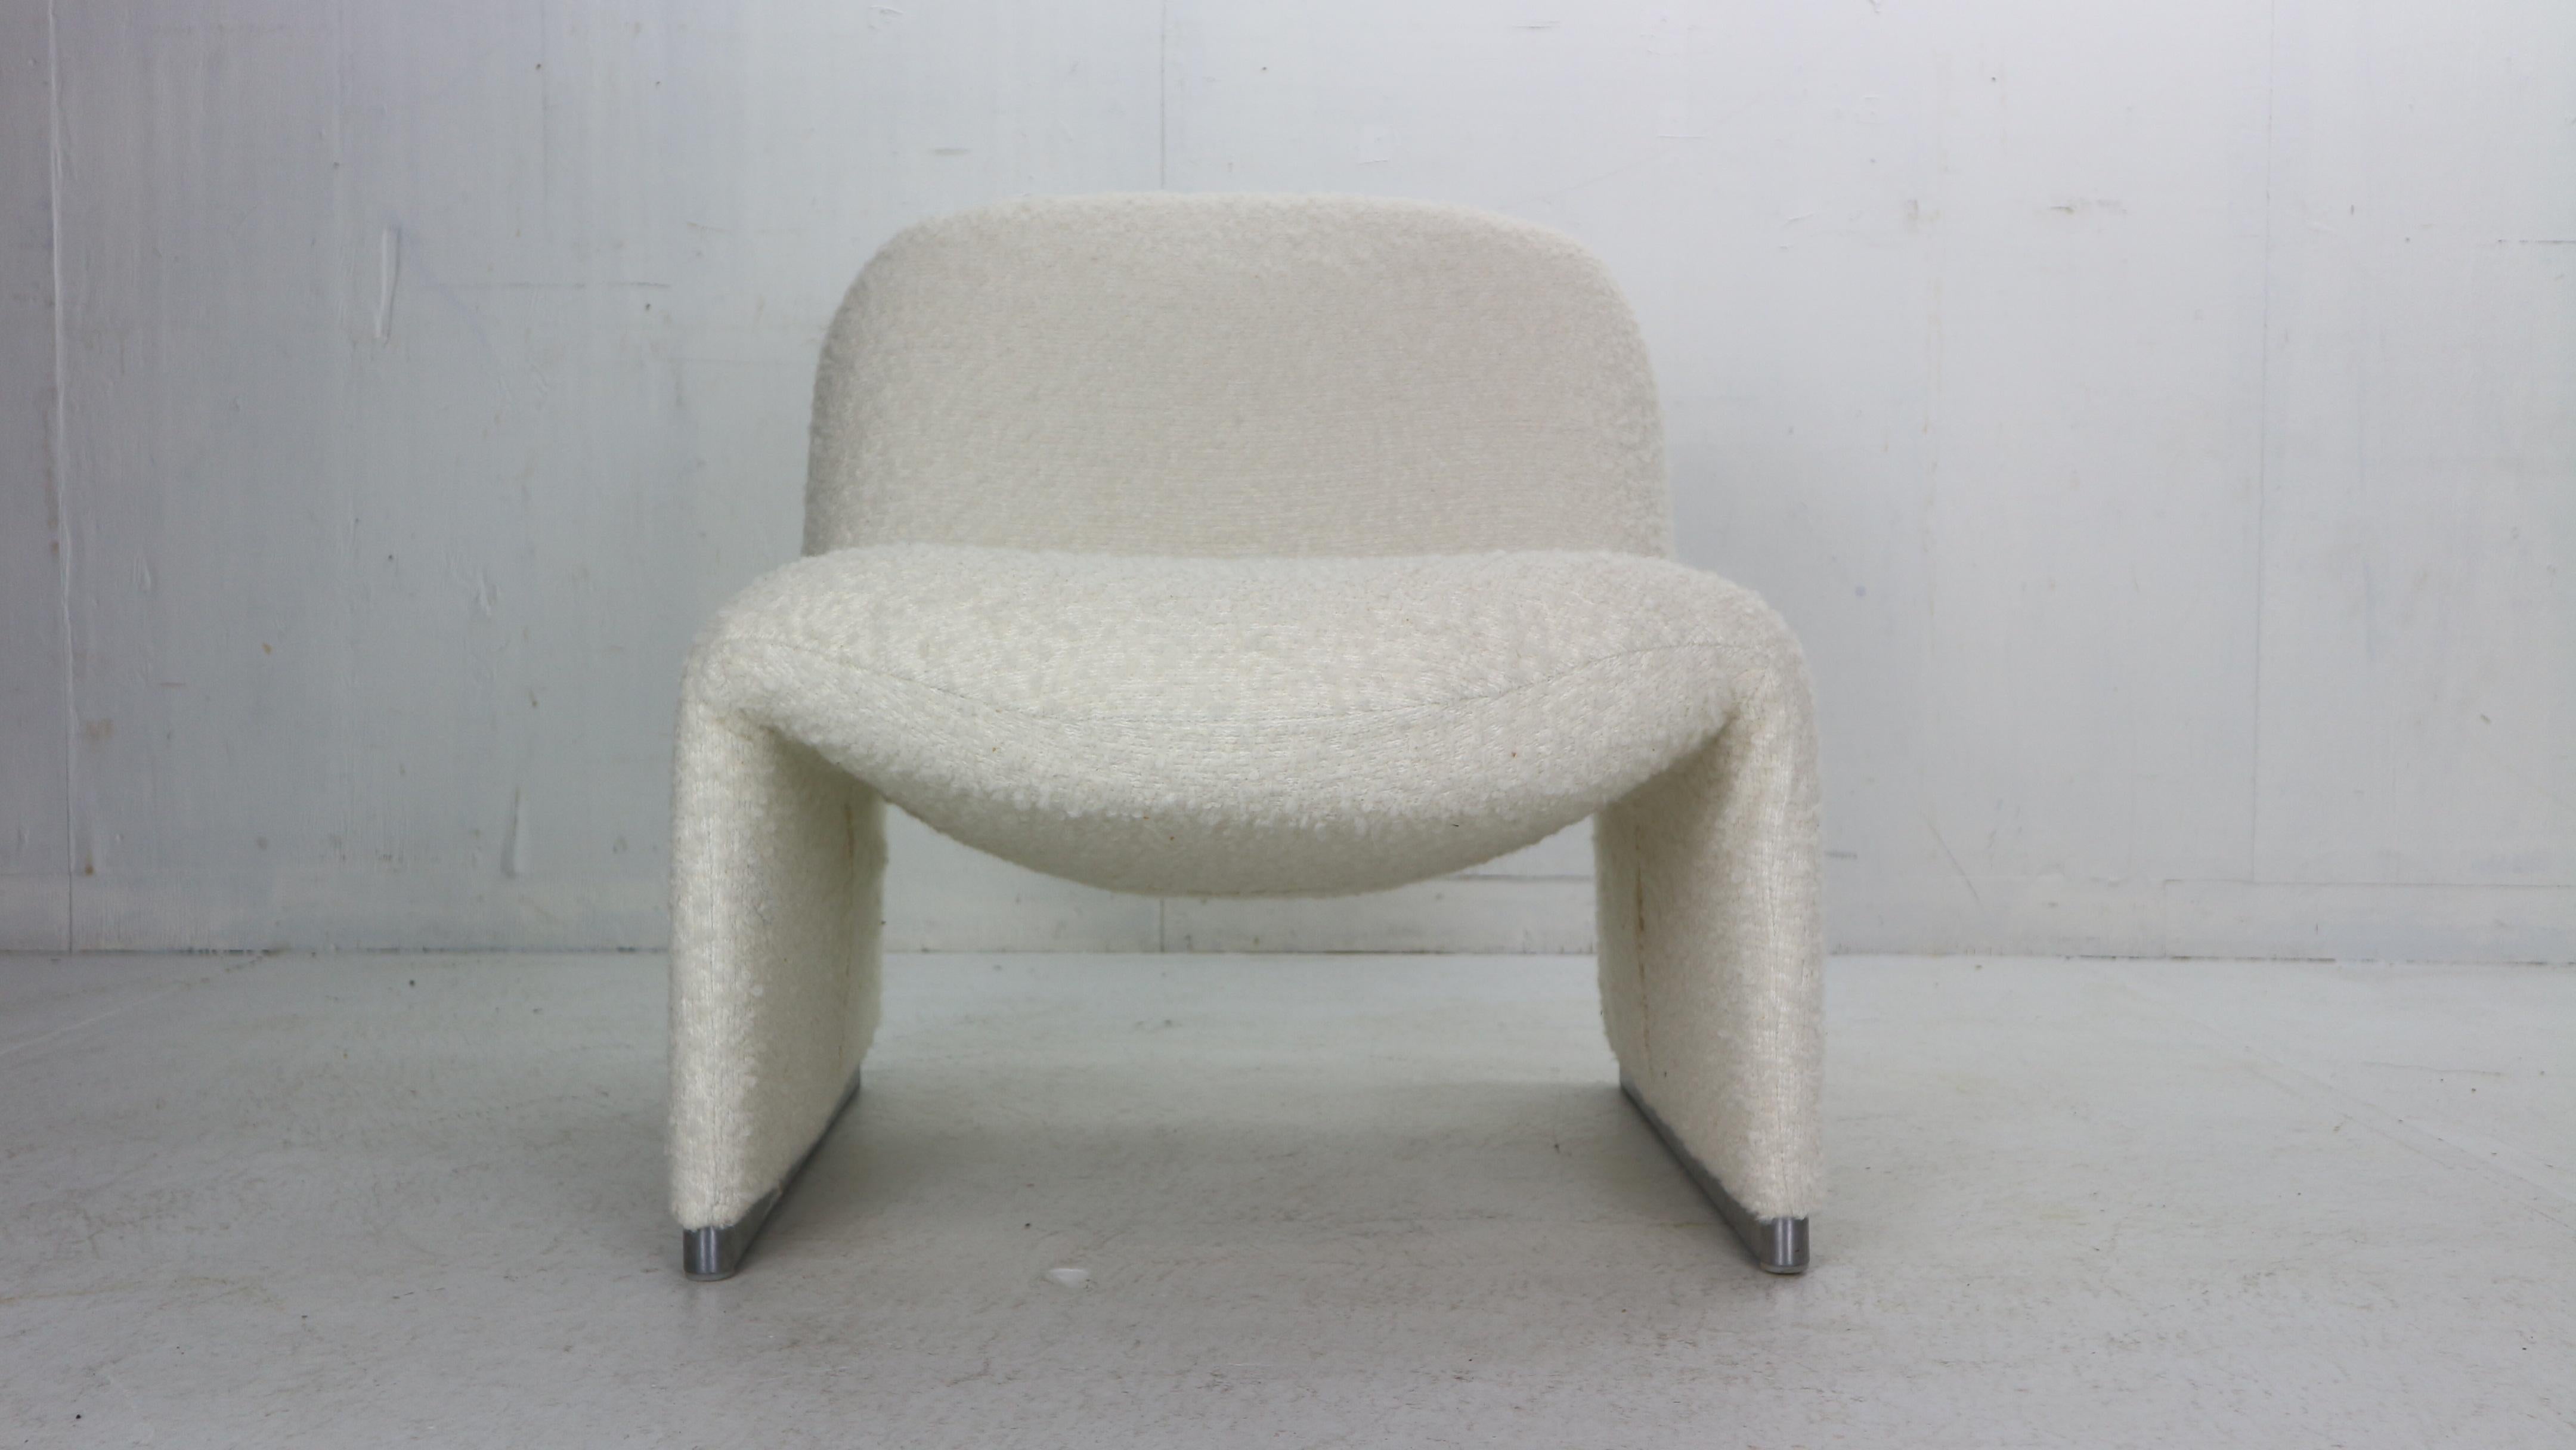 'Alky' slipper lounge chair was designed by Giancarlo Piretti and produced by the Italian maker Castelli during the 1970s period, Italy.
Made with fabric over foam over an aluminium base, the Alky chair is well-known for being a multifunctional